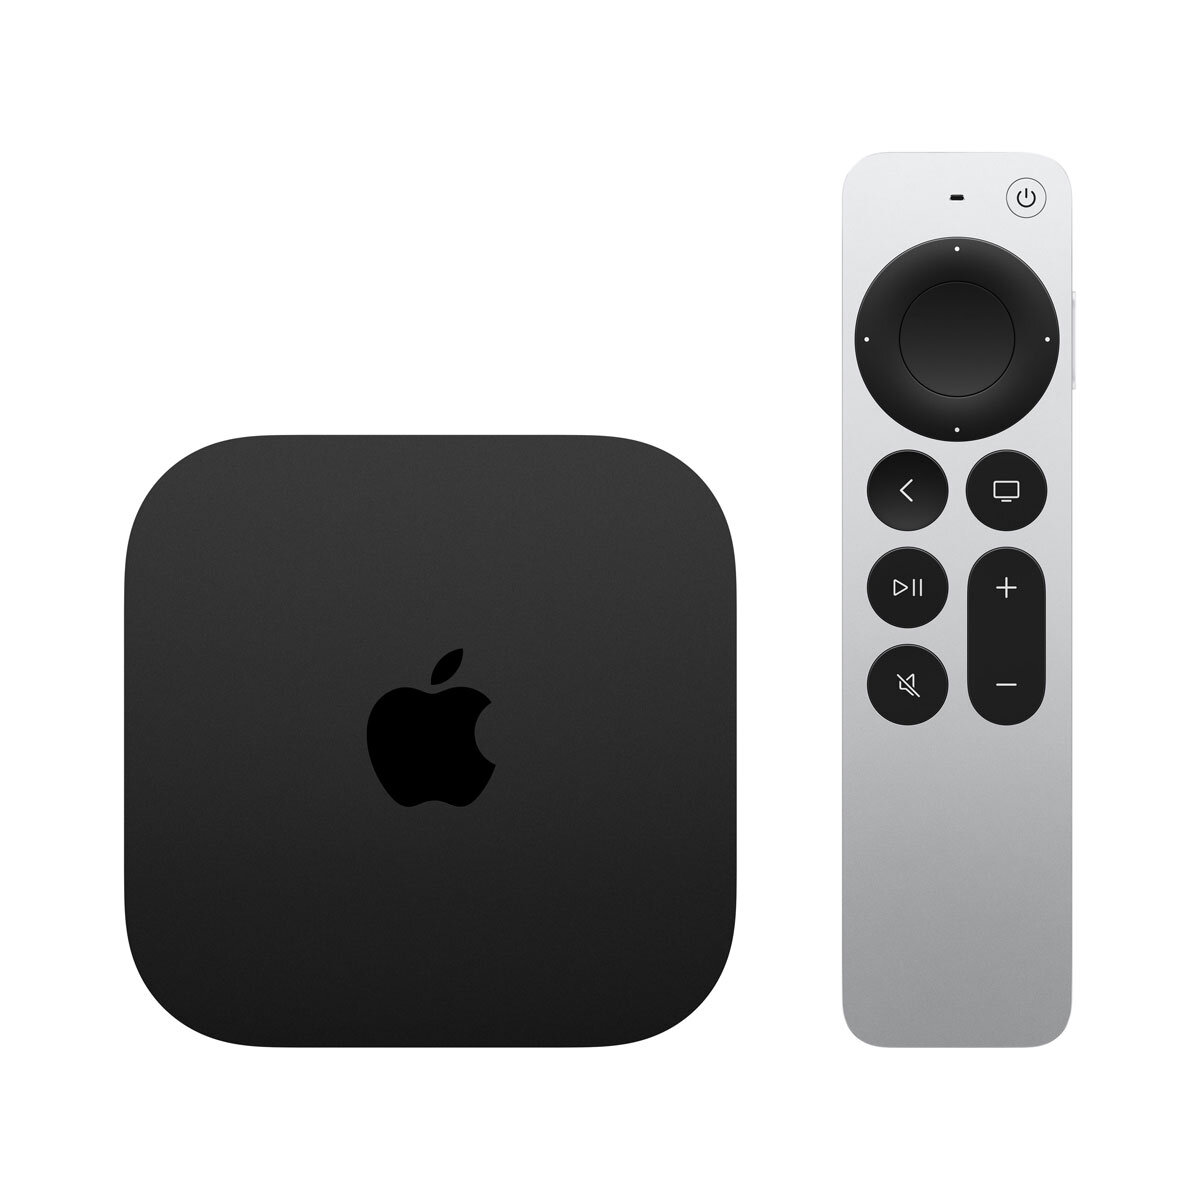 Buy Apple TV 4K WiFi with 64GB, MN873B/A at costco.co.uk